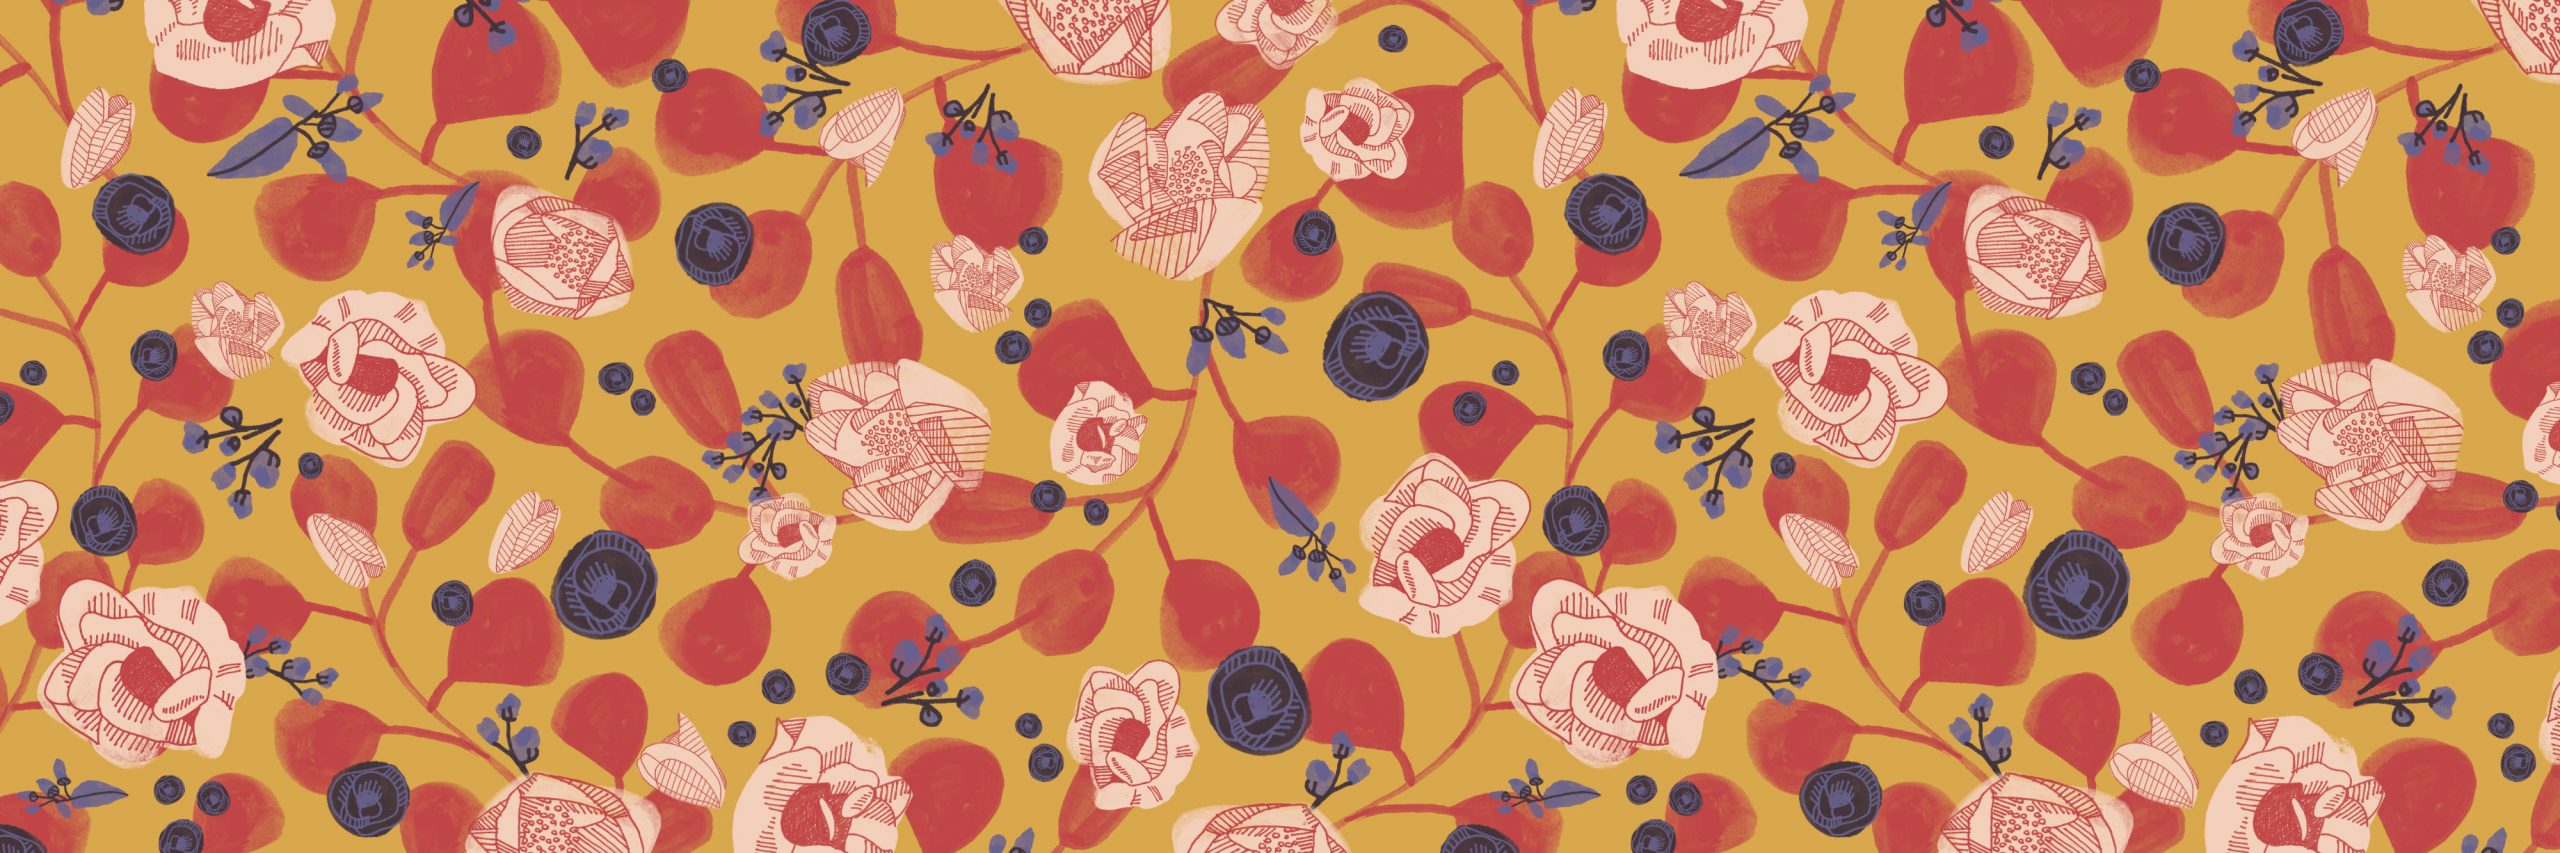 repeating floral pattern